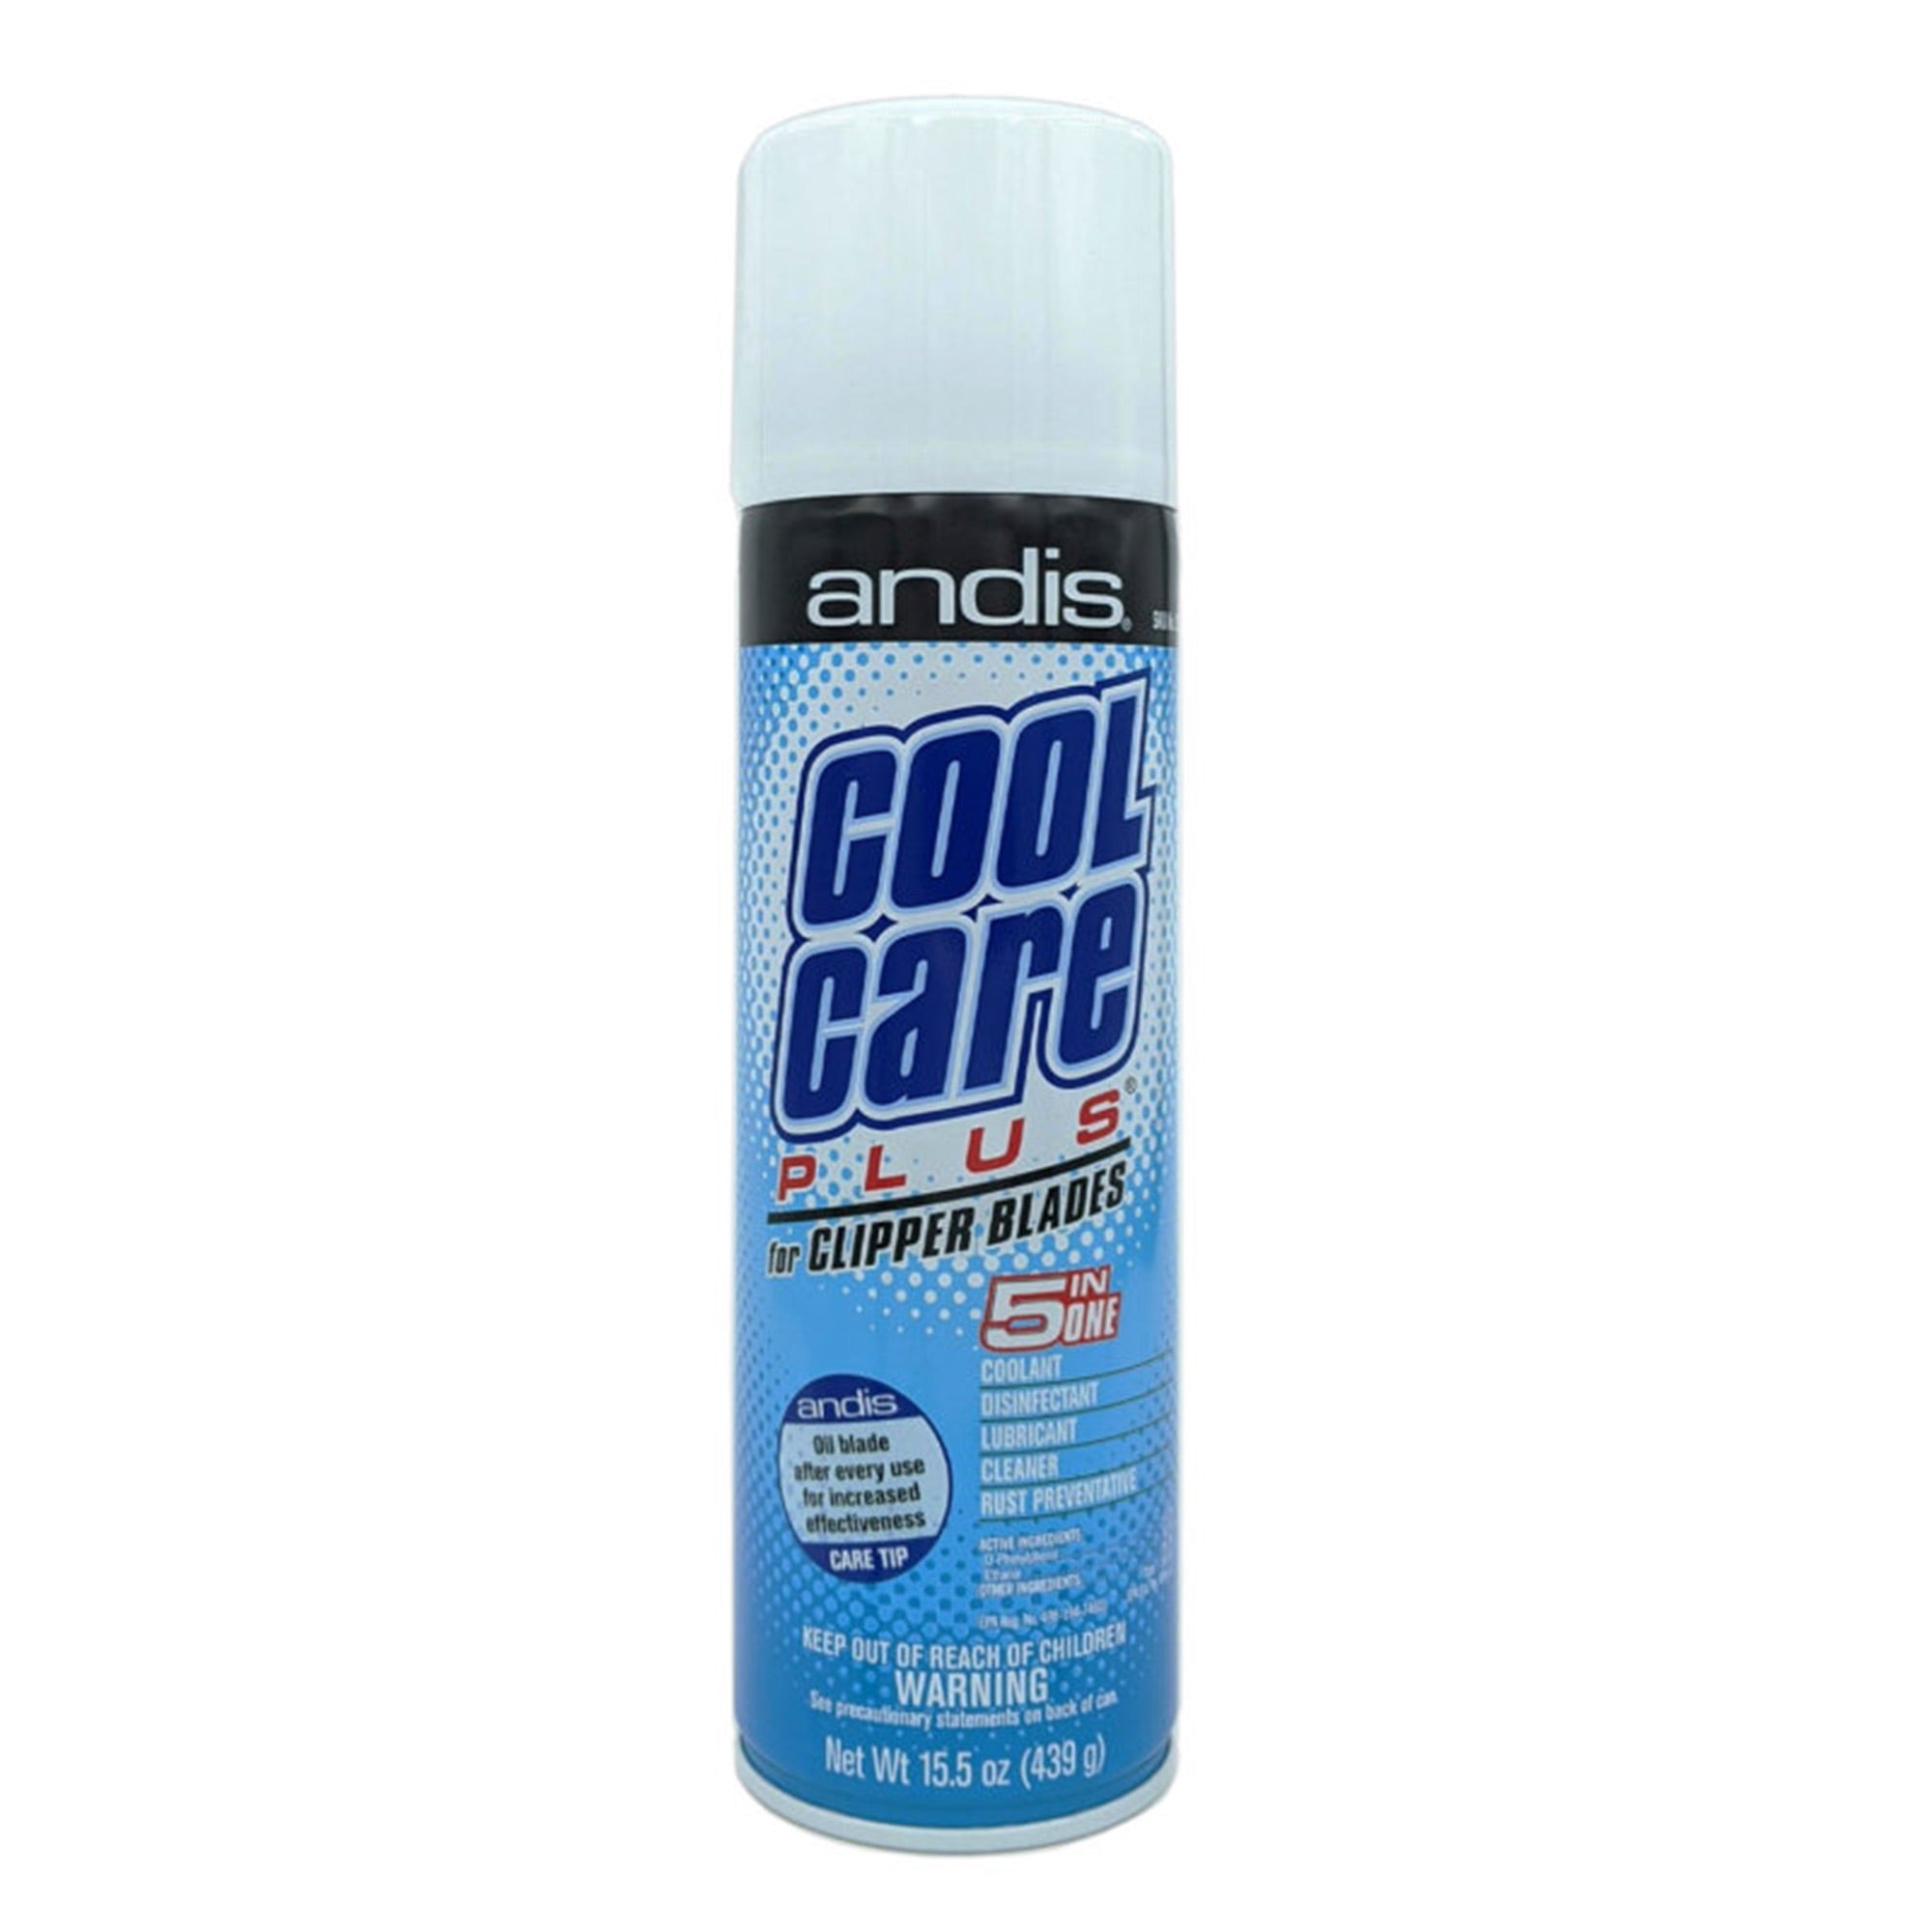 Andis - Cool Care Plus 5 in 1 Cleaner Spray 439g